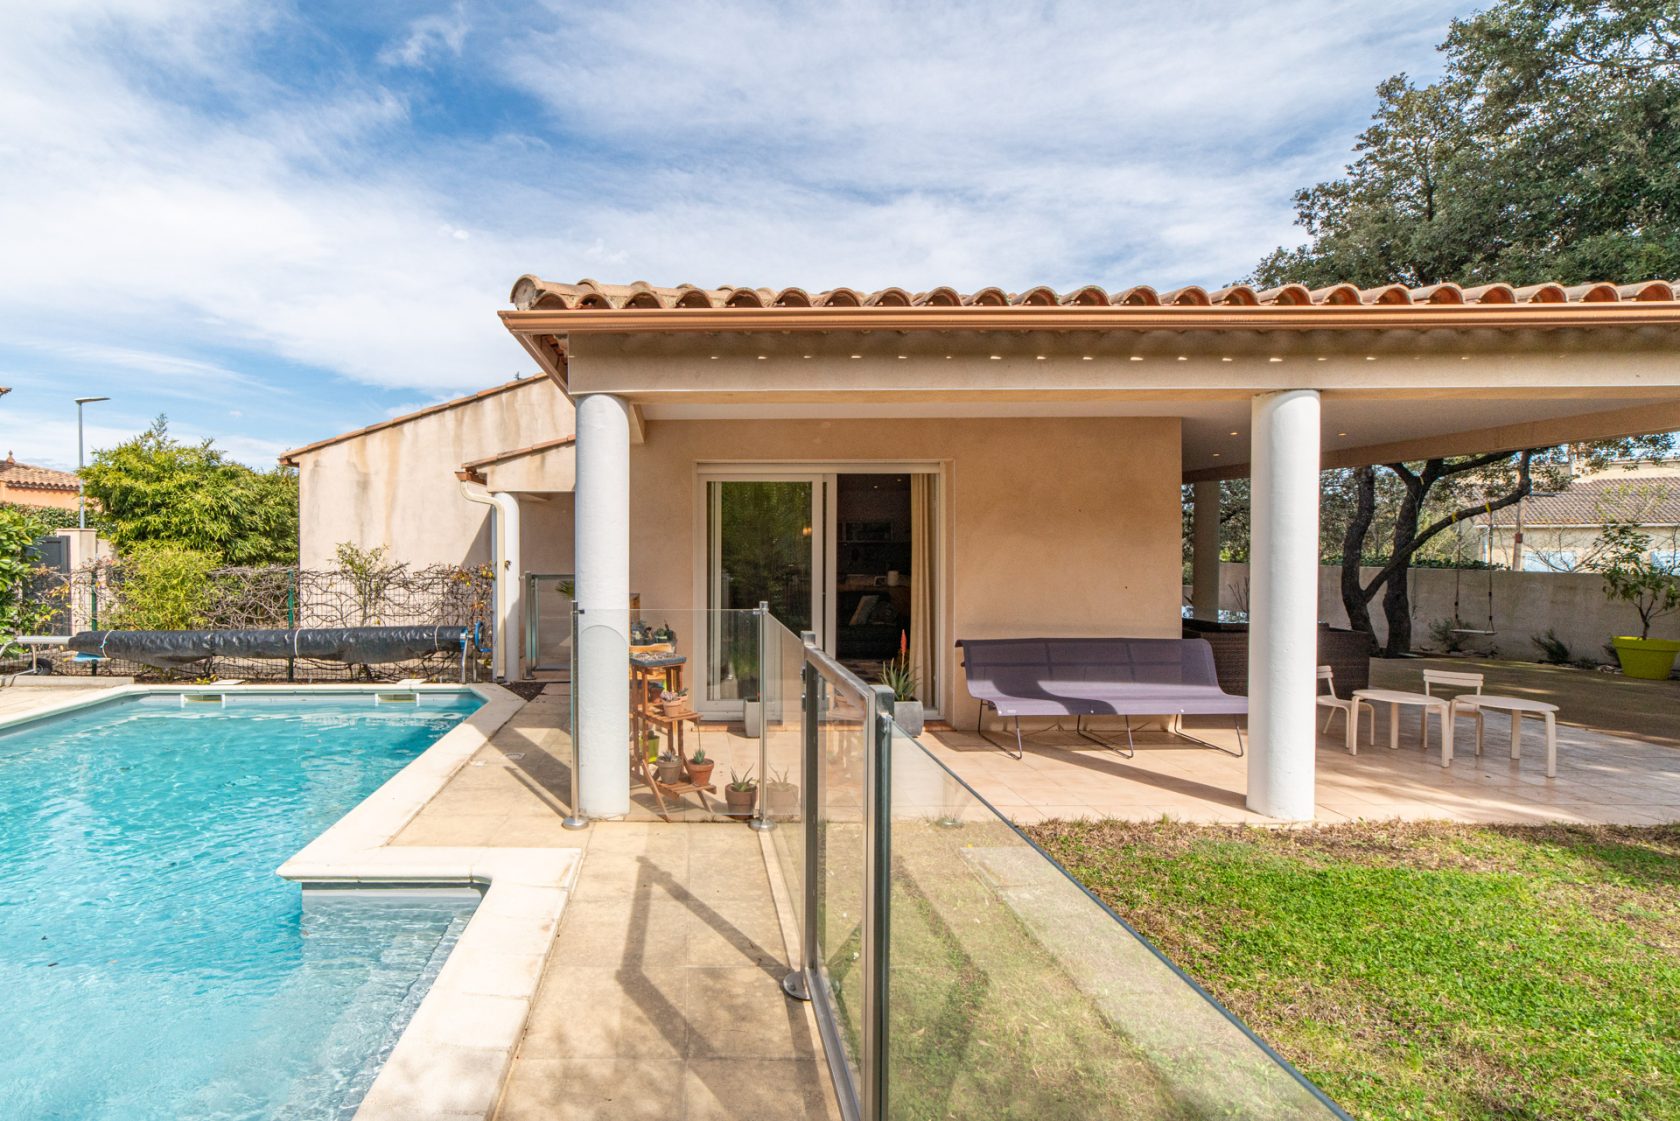 Villa with swimming pool at Vacquerolles golf course